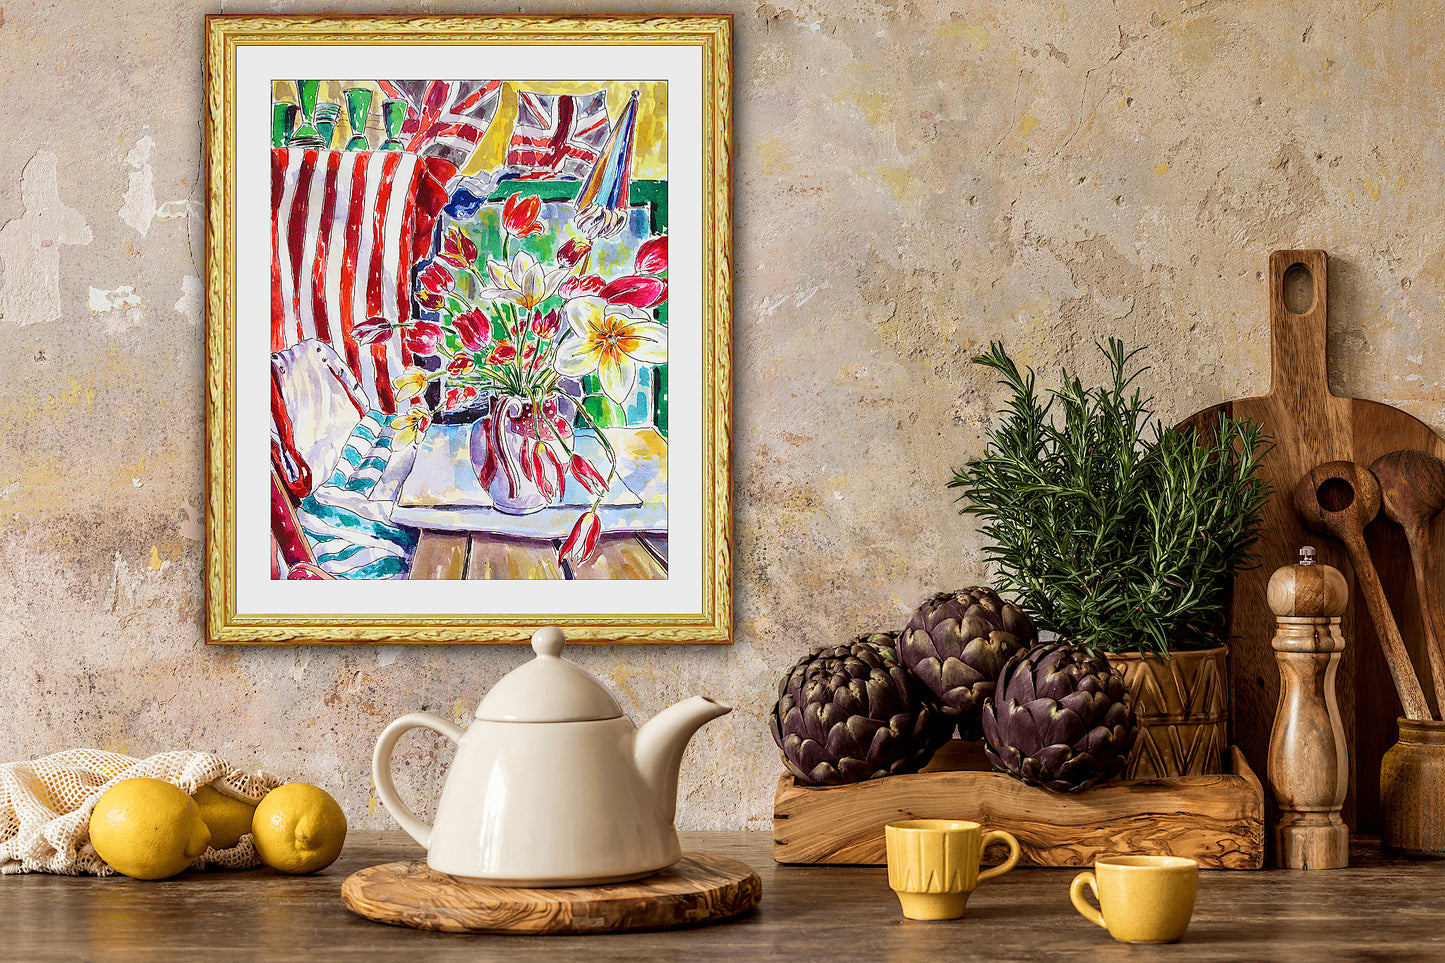 Summer Celebration, An Original Watercolor And Ink Painting Of Flowers, Union Jack And Red And White Striped Fabric